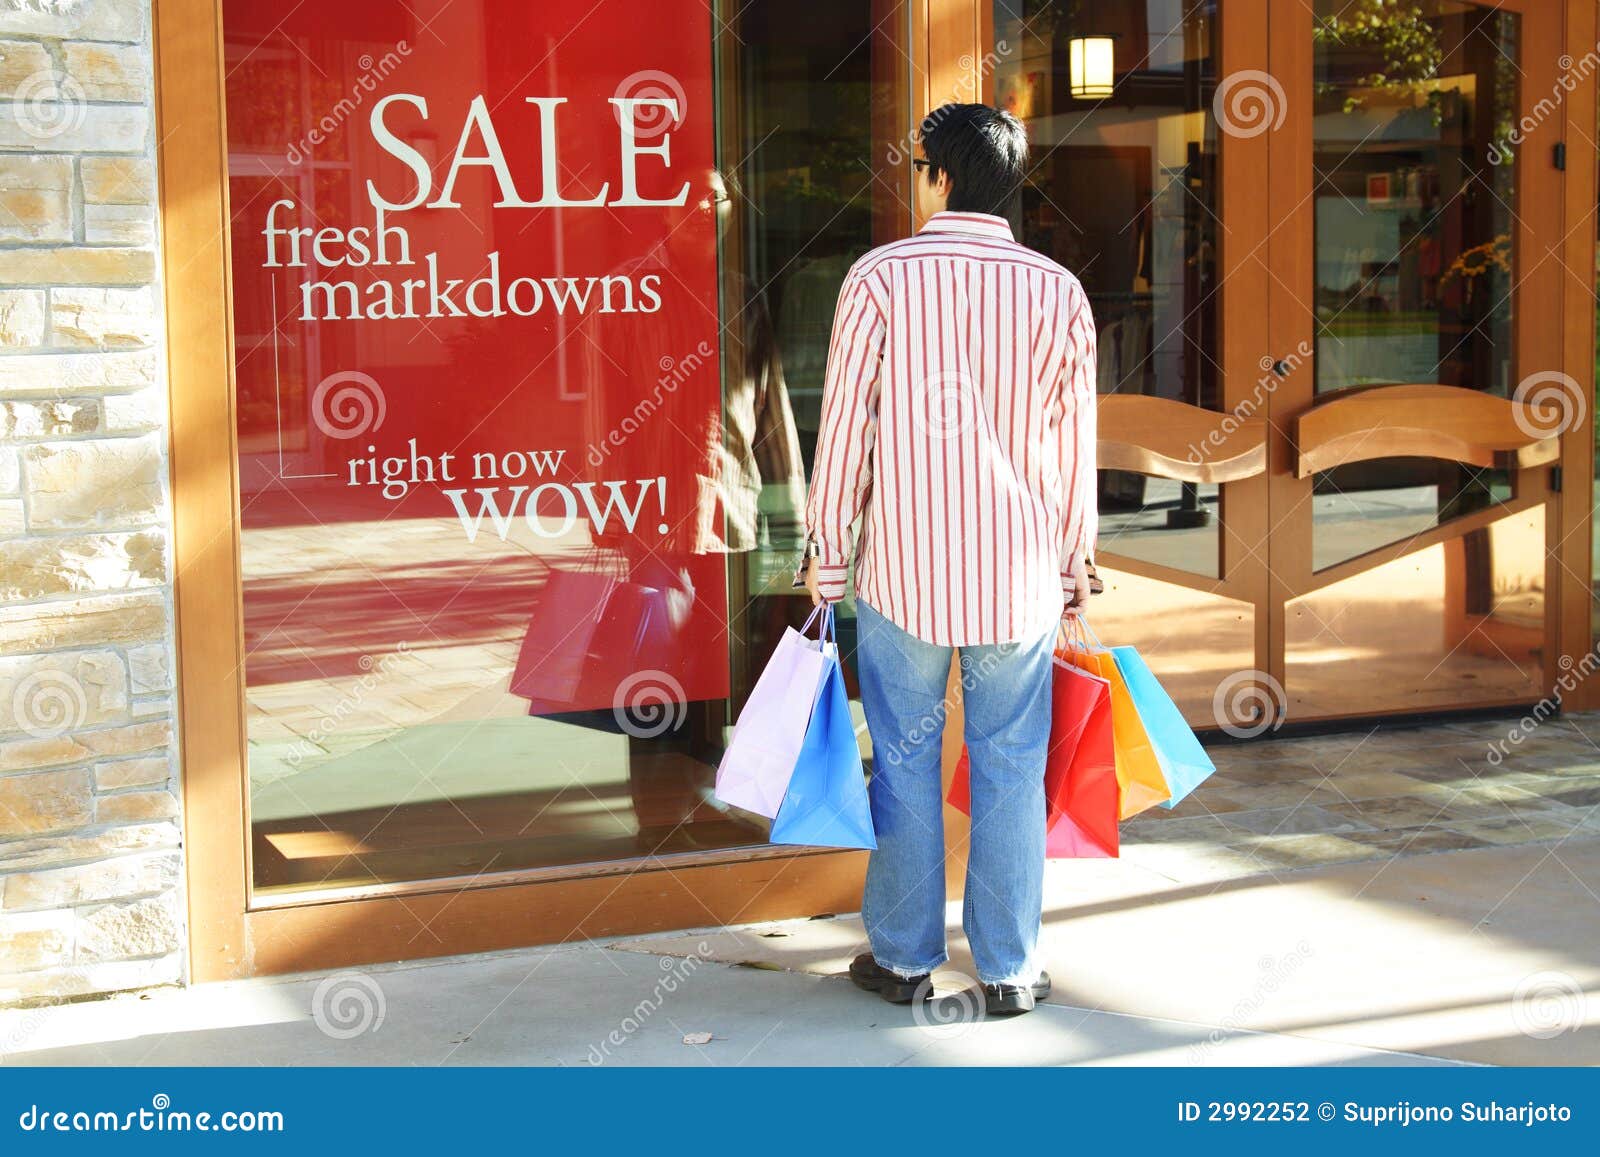 27,589 Outlet Mall Sale Stock Photos - Free & Royalty-Free Stock Photos  from Dreamstime